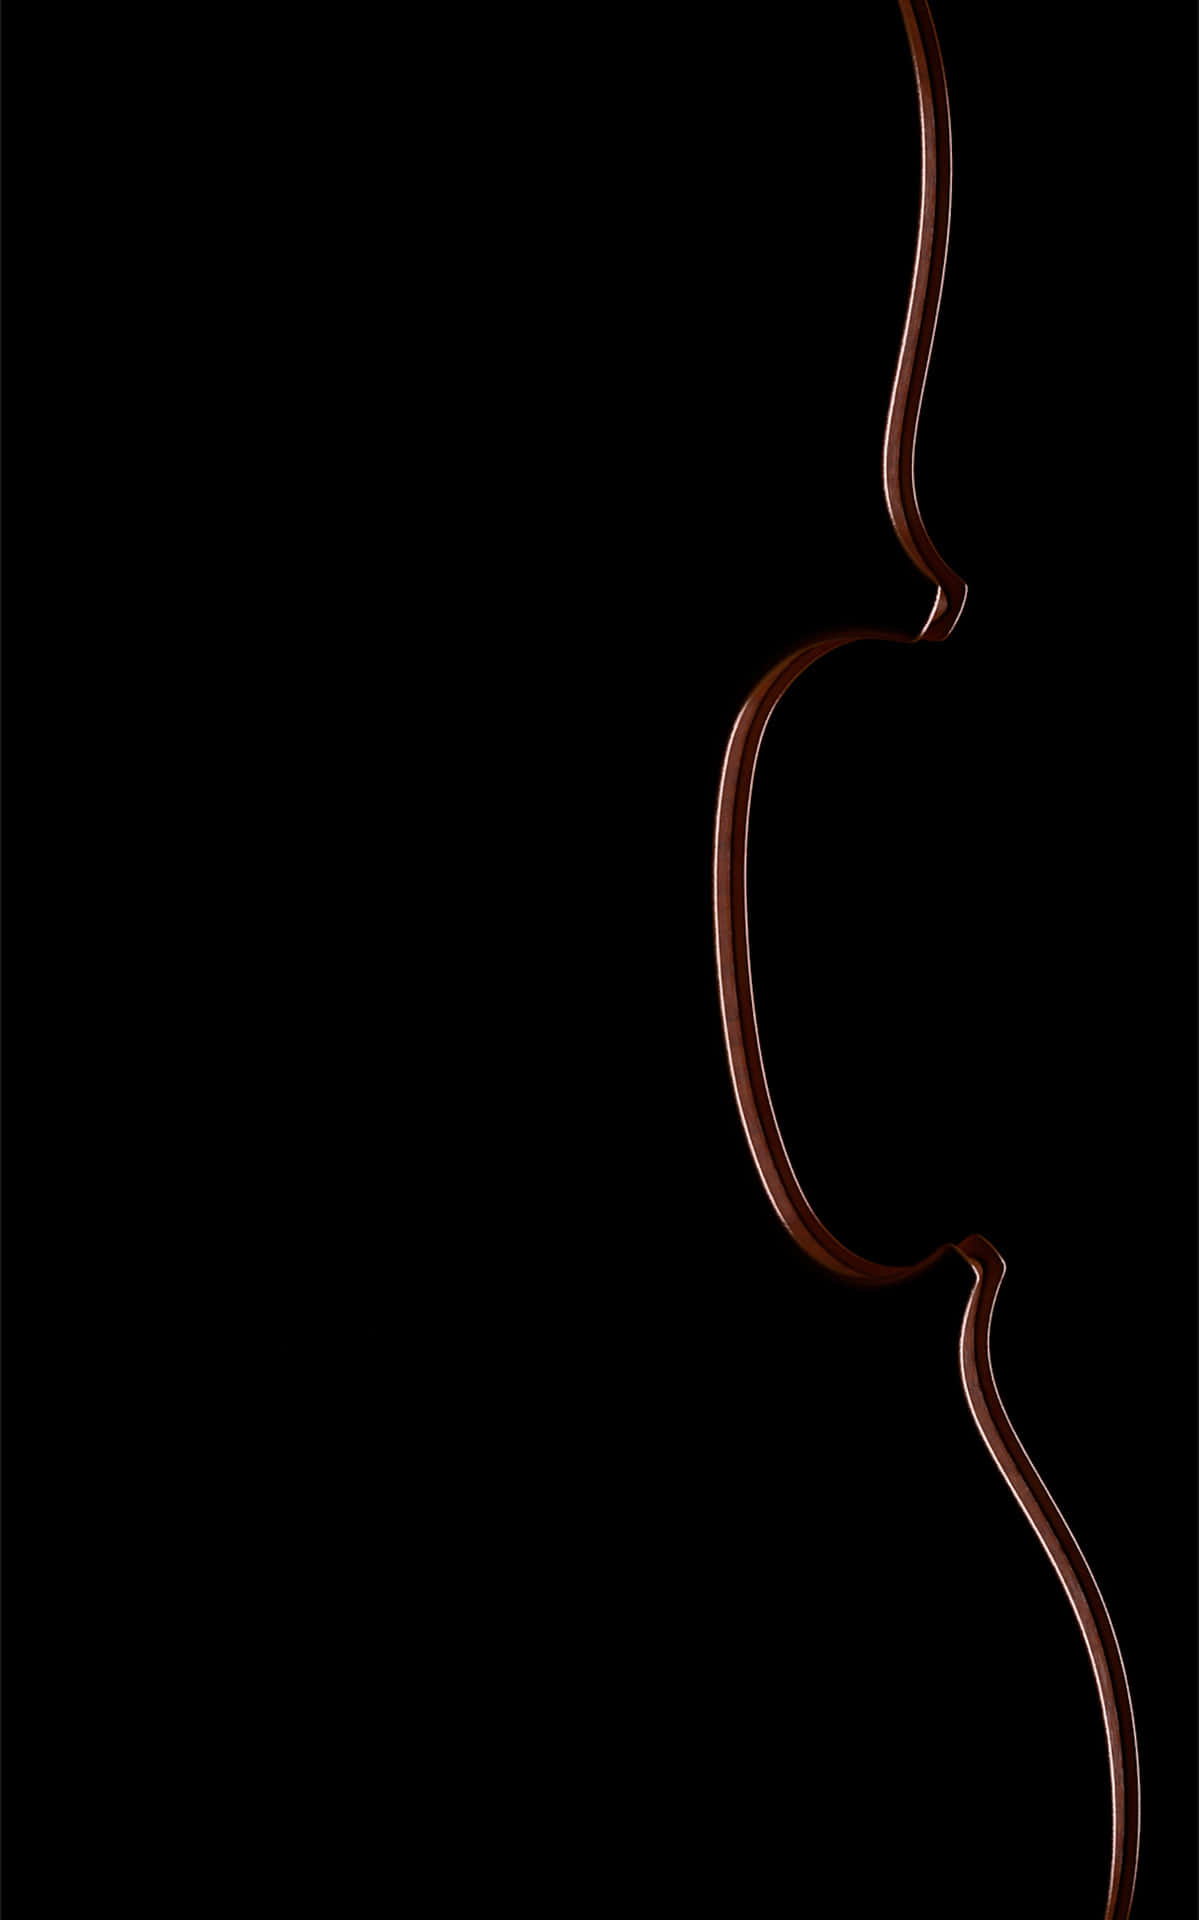 A Violin Is Silhouetted Against A Black Background Wallpaper